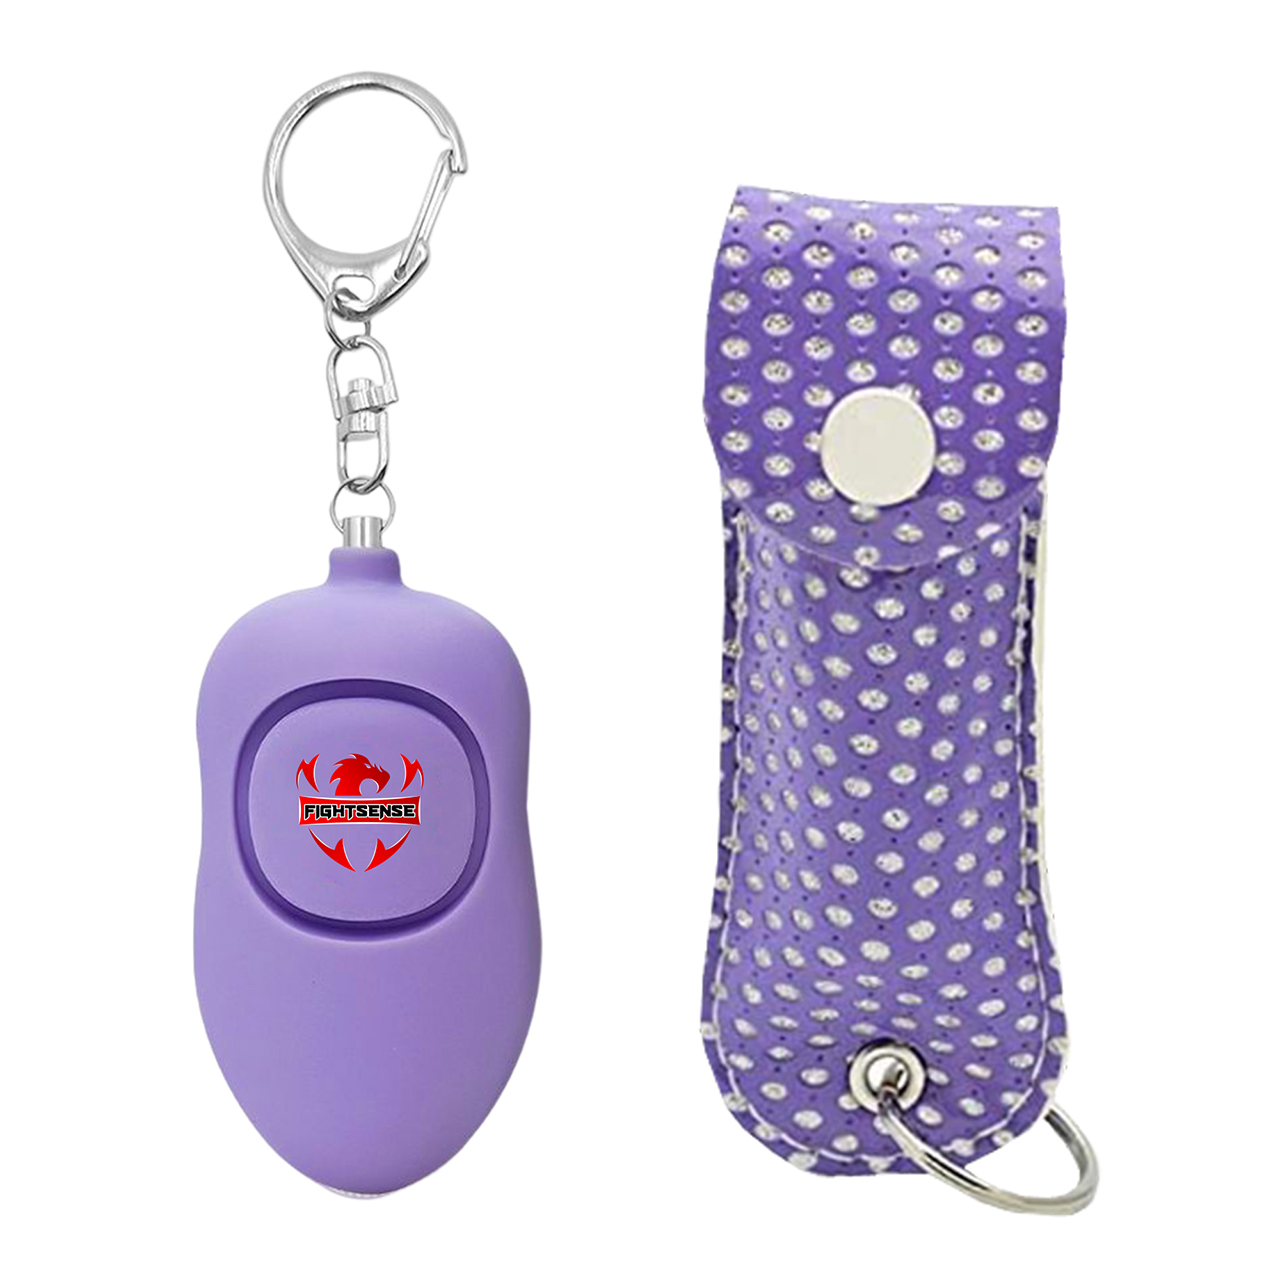 Pepper spray and keychain alarm combo pack for women self-defense